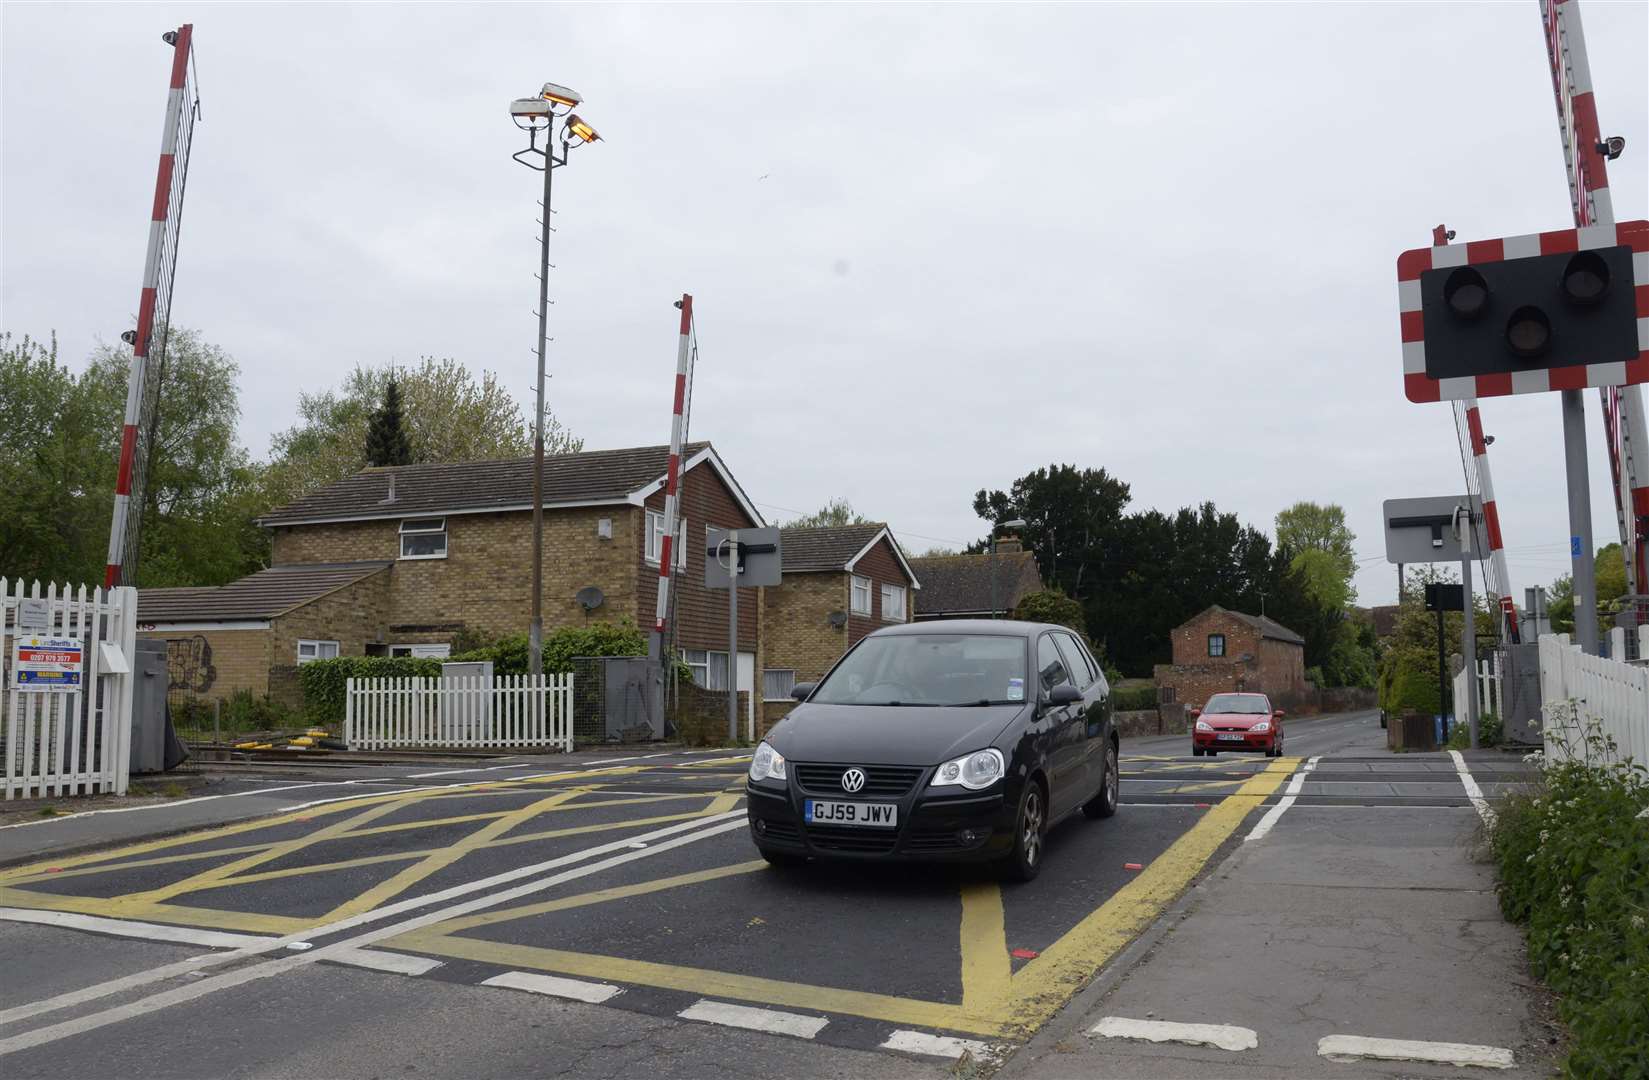 The St Stephen's level crossing